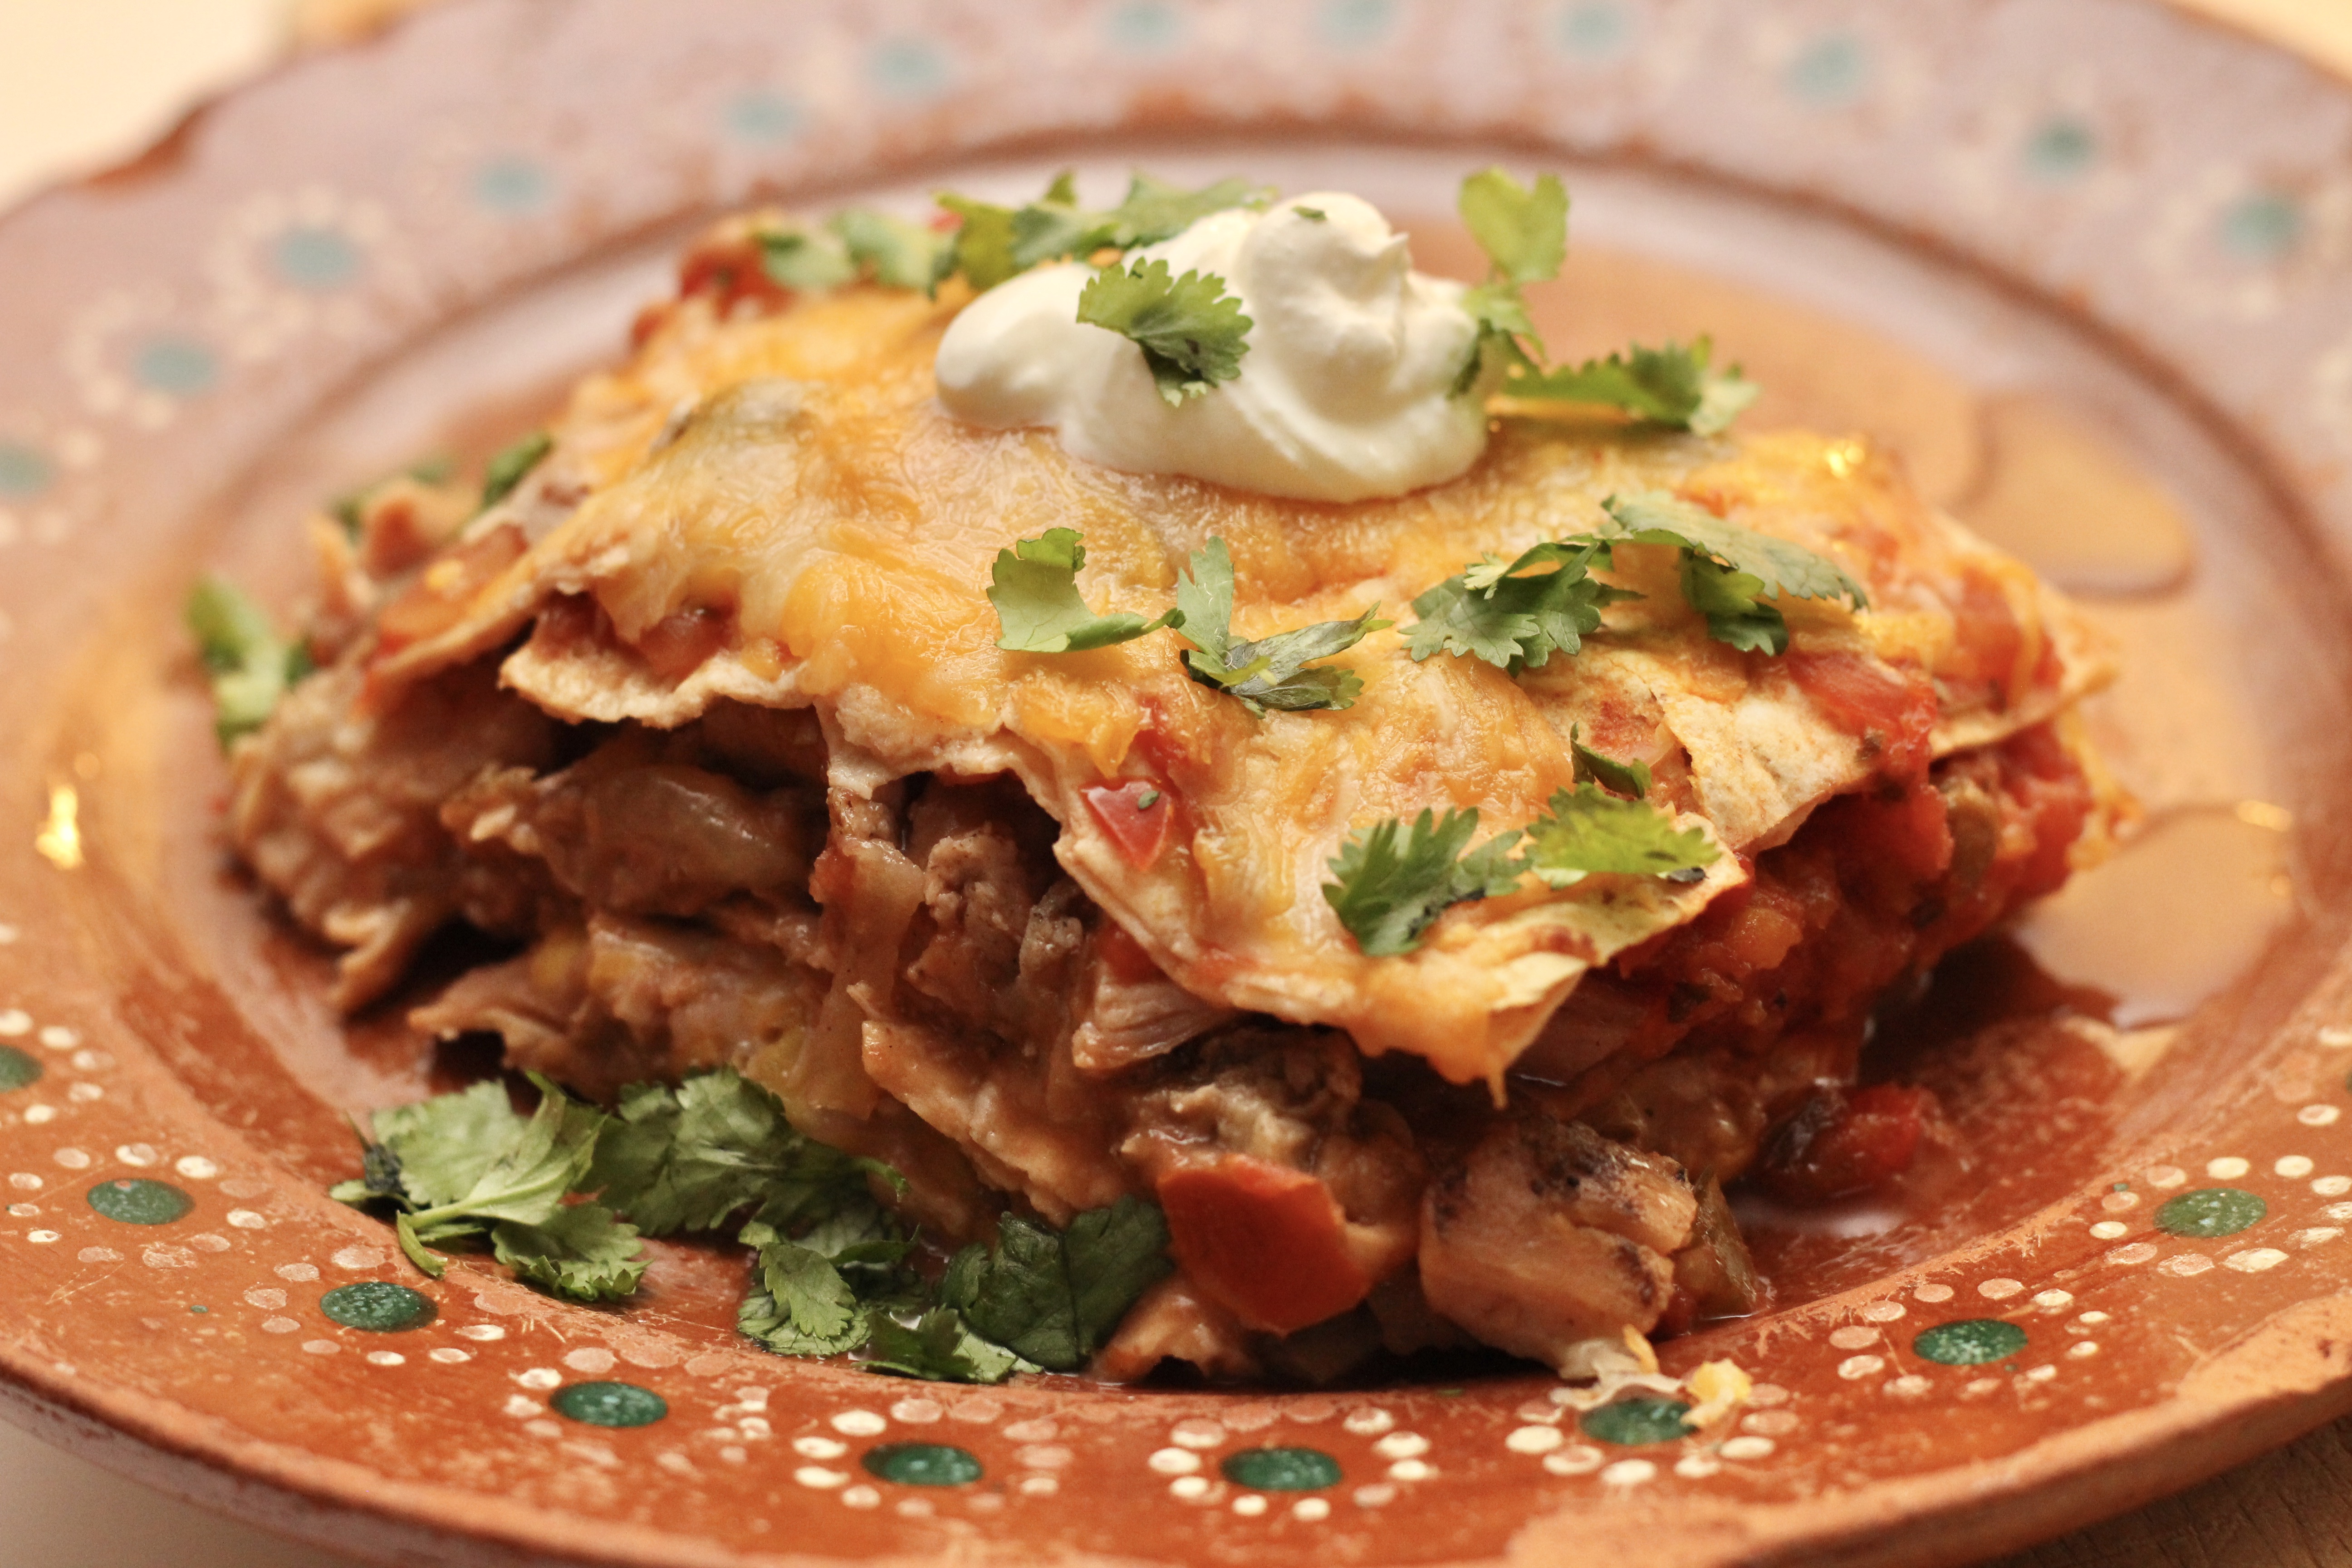 <p>"A fabulously easy and delicious take on a favorite, this lasagna is full of Mexican flavors and uses layers of corn tortillas in place of noodles," says SunnyDaysNora. "Easy to adapt and personalize -- try adding sauteed veggies, Spanish rice, diced jalapeno, or even switching out the red salsa for green!"</p>
                          